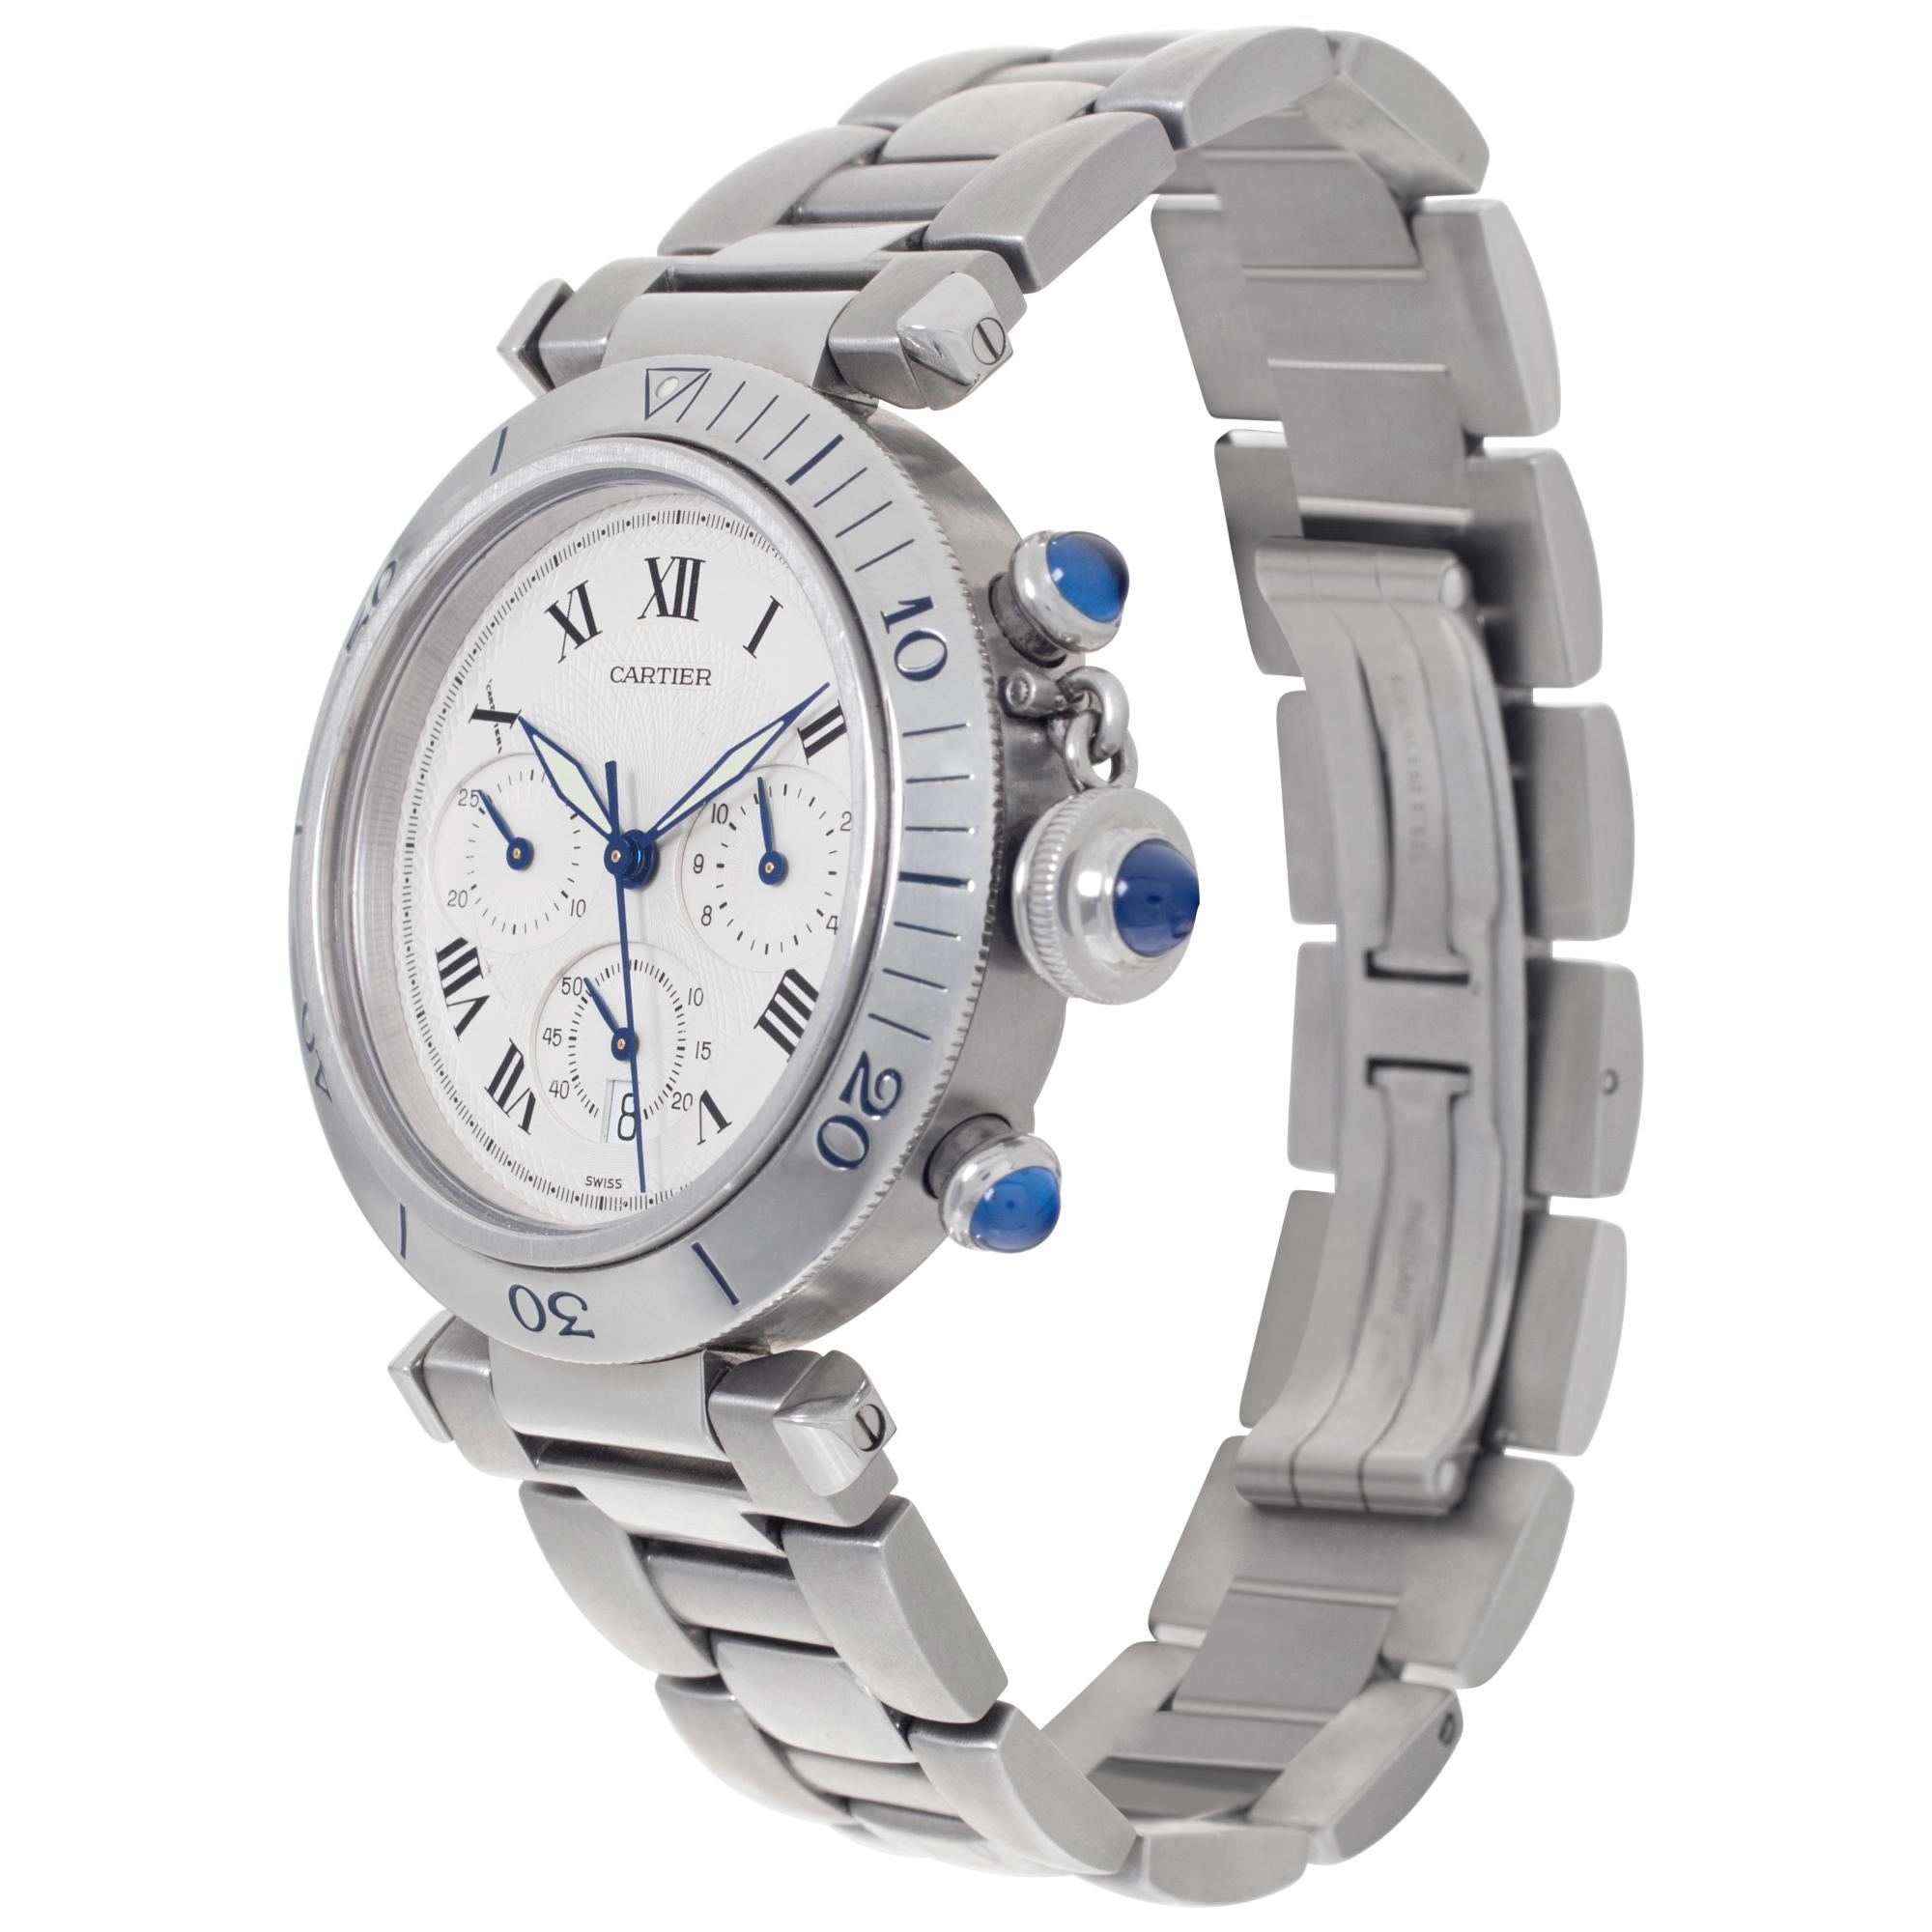 Cartier Pasha in stainless steel. Quartz w/ subseconds, date and chronograph. 38 mm case size. Ref 1050. Fine Pre-owned Cartier Watch. Certified preowned Sport Cartier Pasha 1050 watch is made out of Stainless steel on a Stainless Steel bracelet